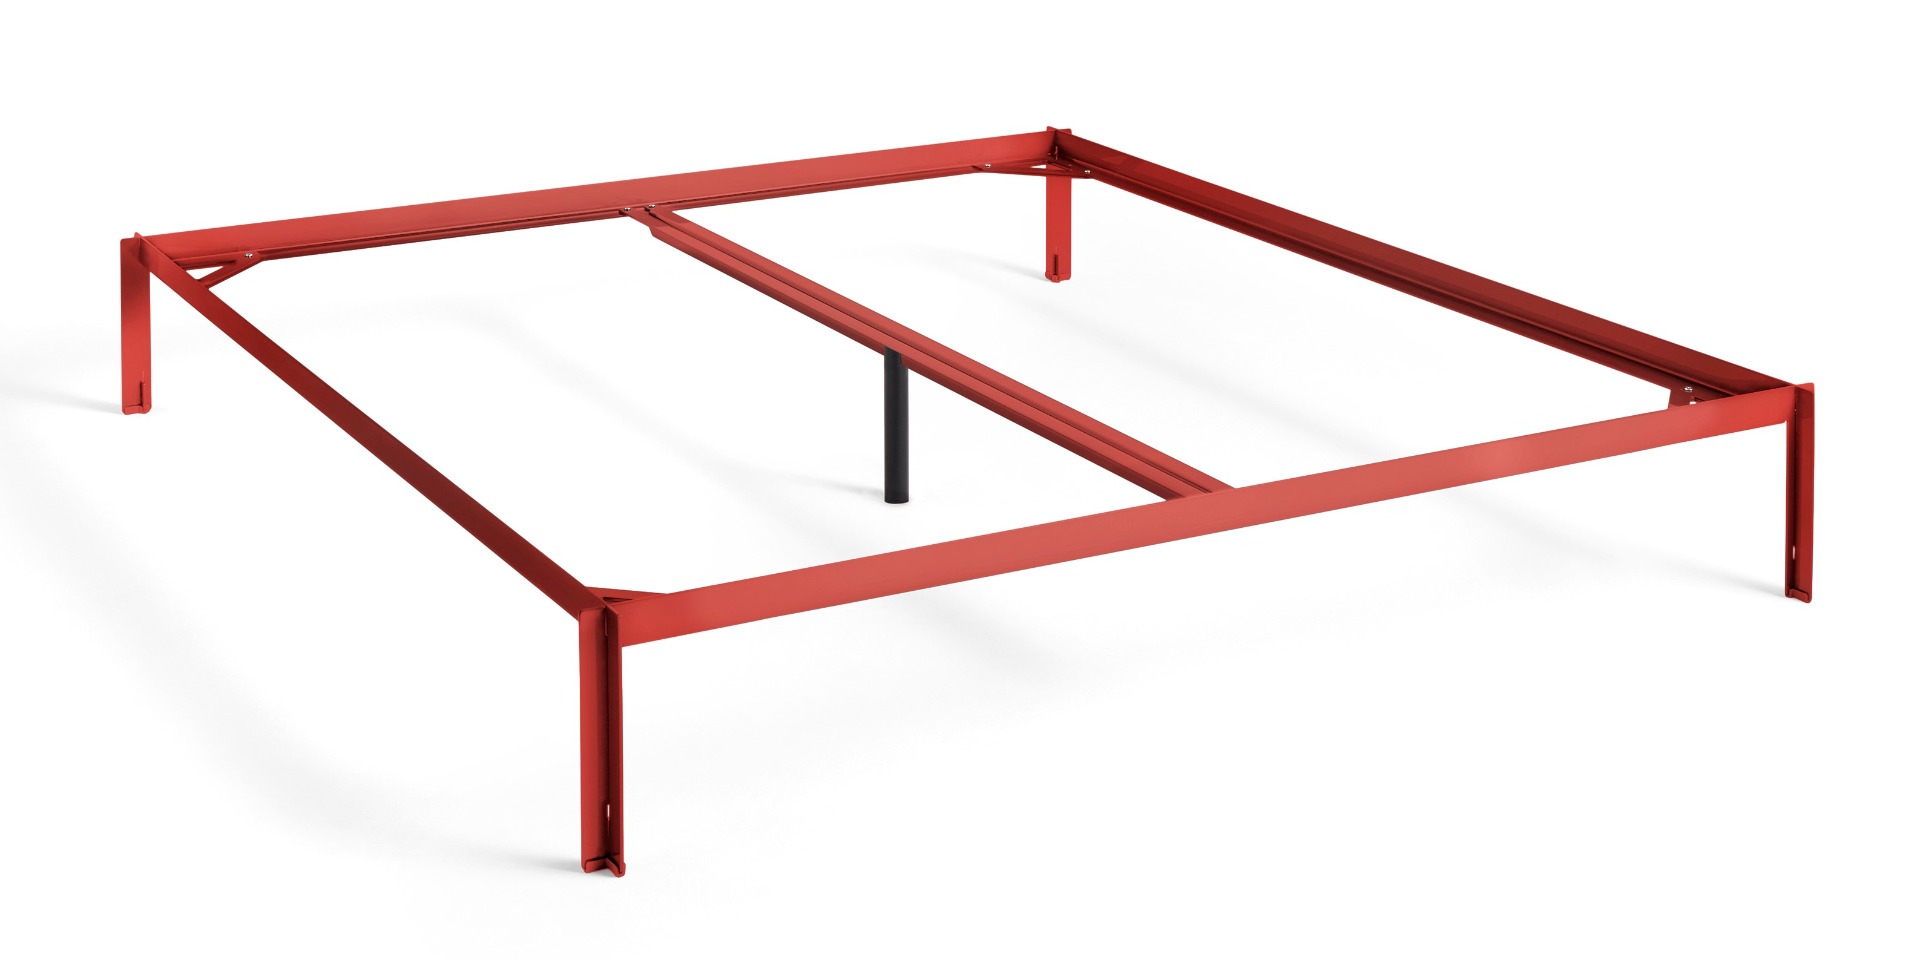 https://www.fundesign.nl/media/catalog/product/a/b/ab073-b561-ah36_connect_bed_w180xl200xh30_with_support_bar_maroon_red.jpg